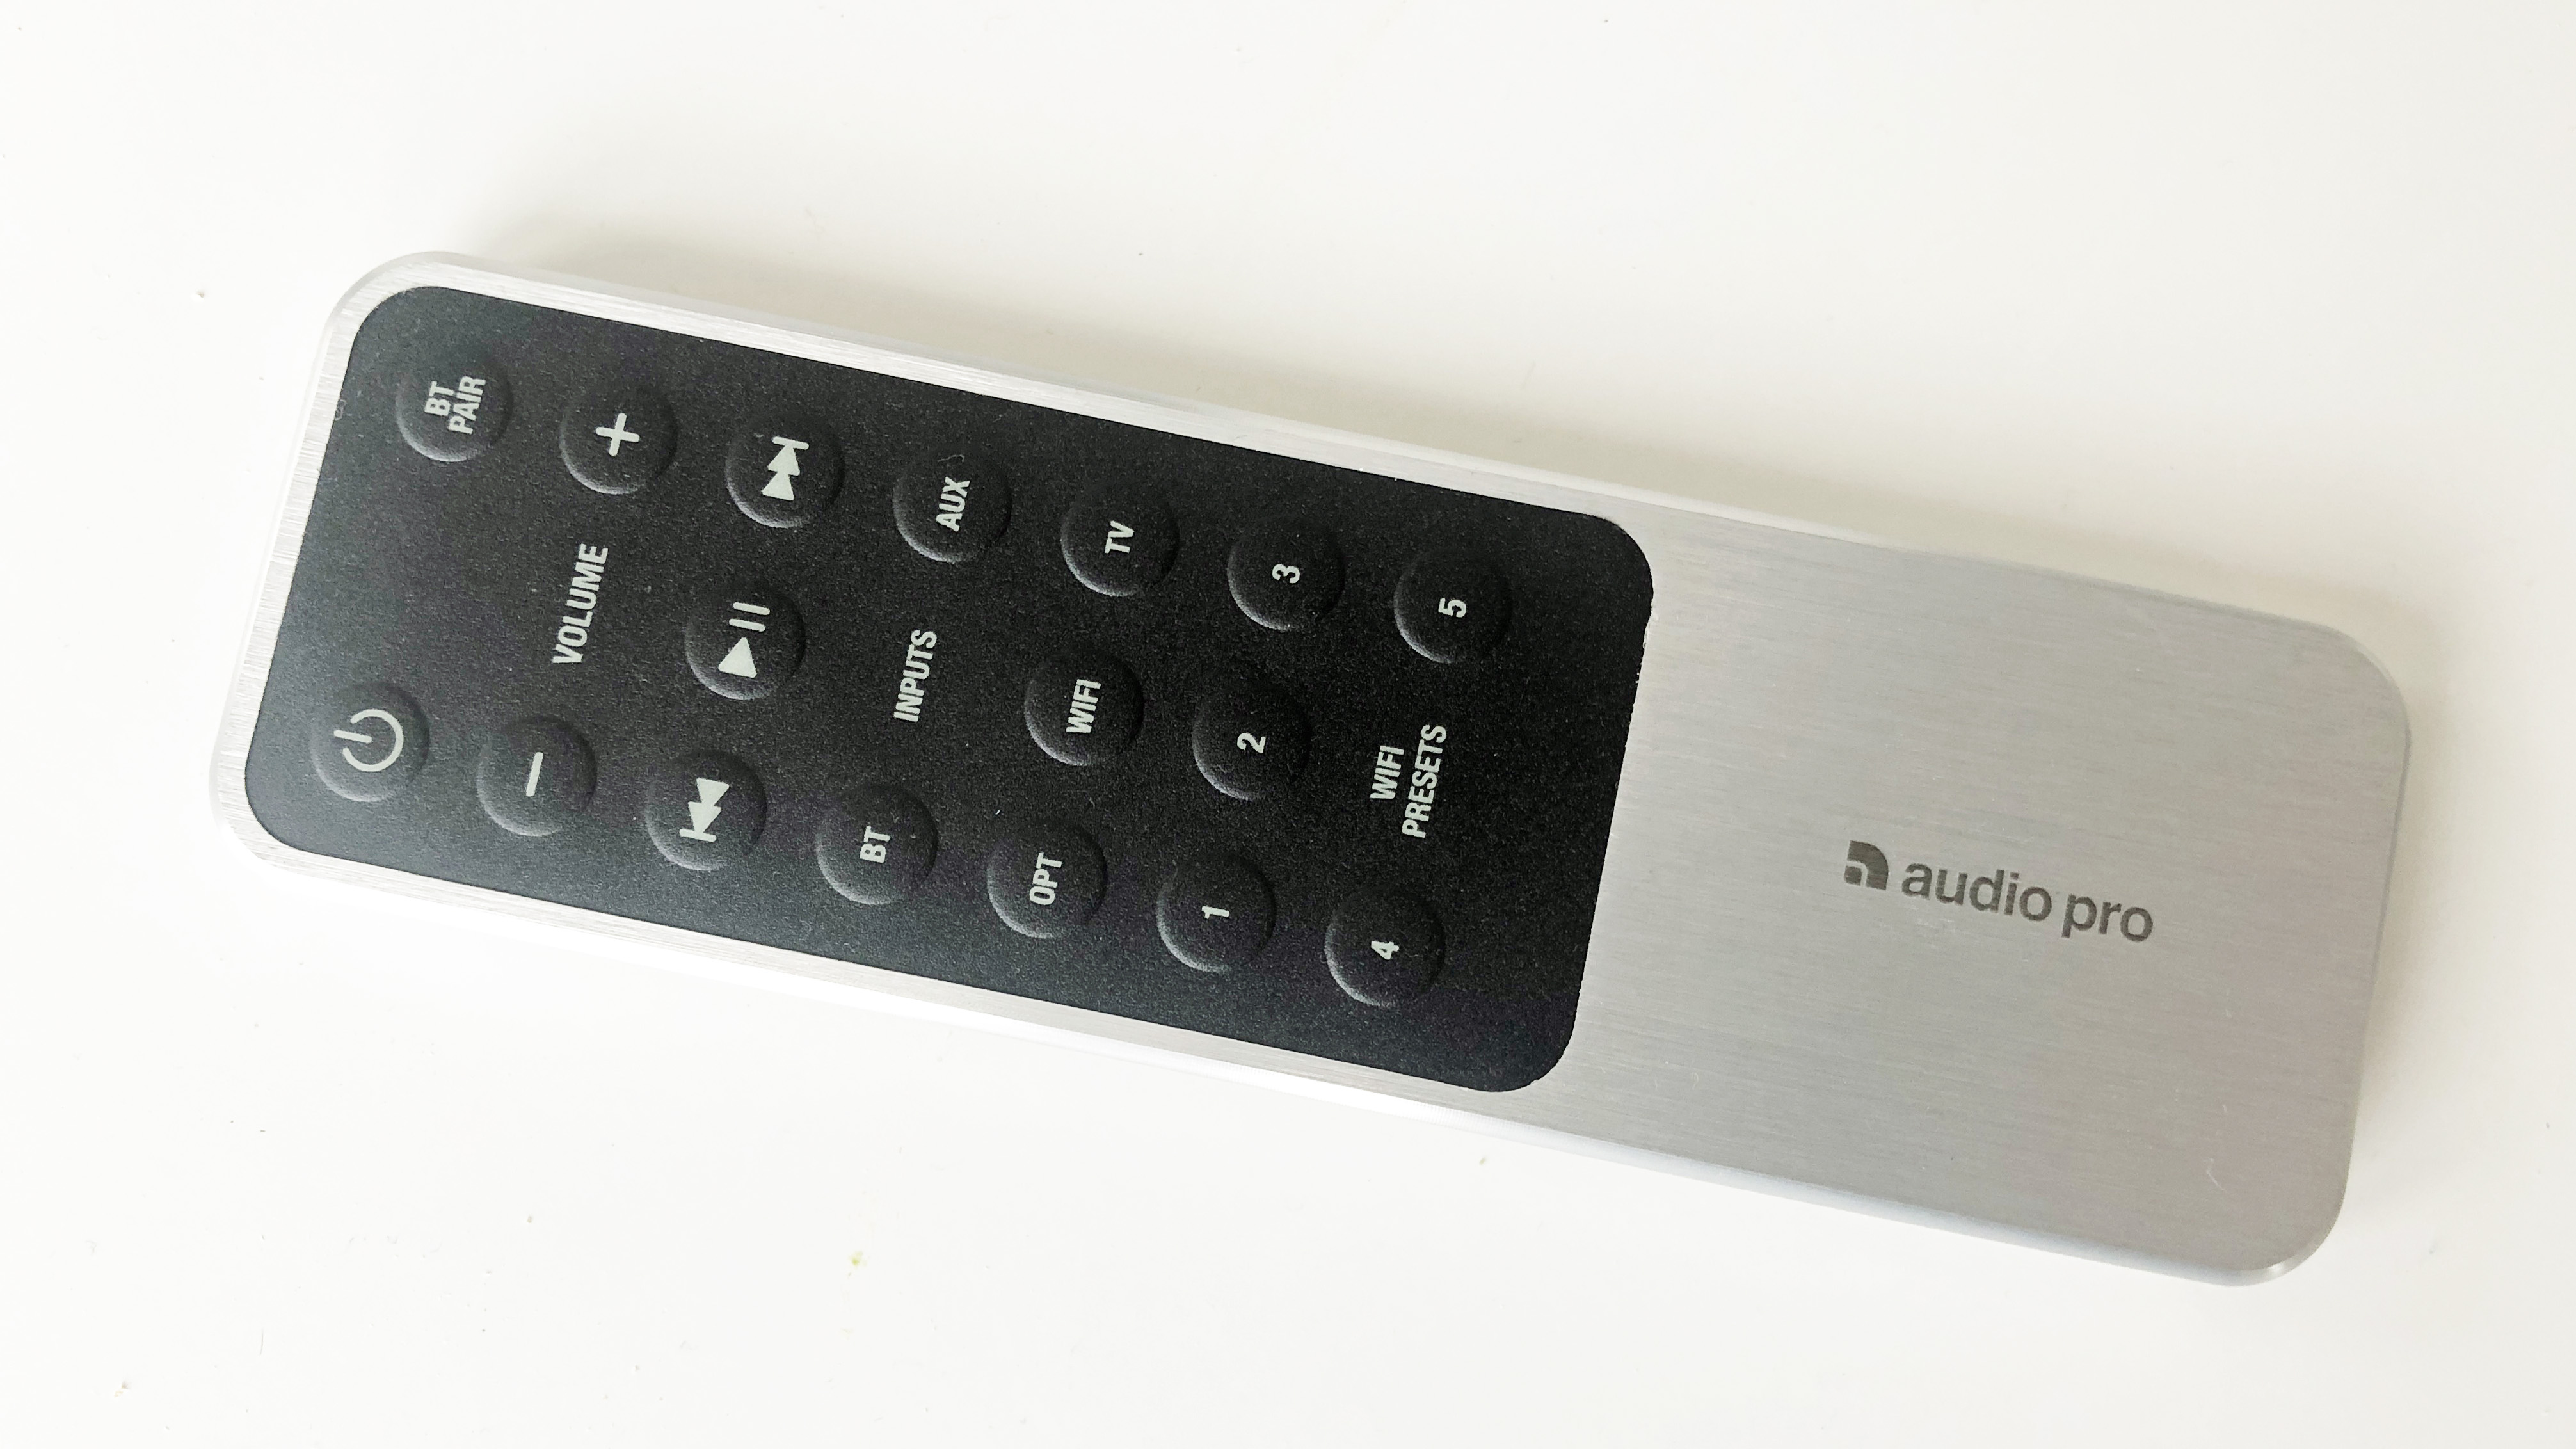 the remote control for the audio pro a36 wireless stereo speakers